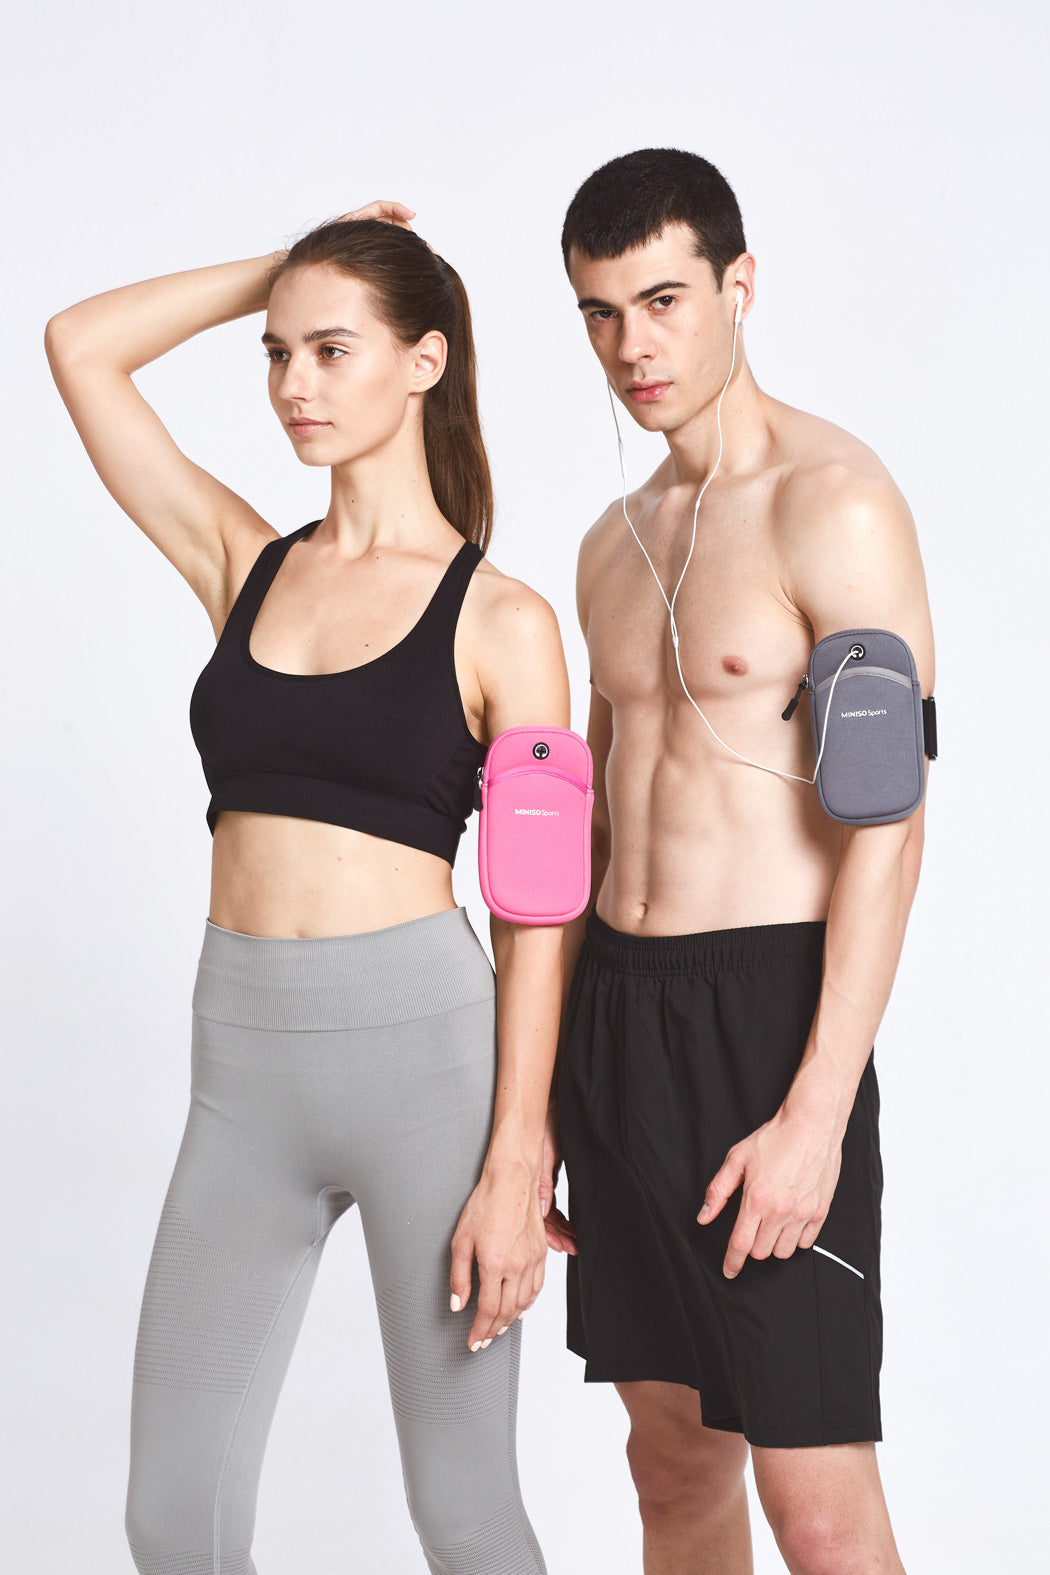 MINISO MINISO SPORTS-ARM BAND WITH DOUBLE POCKETS(GREY) 2008742910104 SPORTS ARM BAND